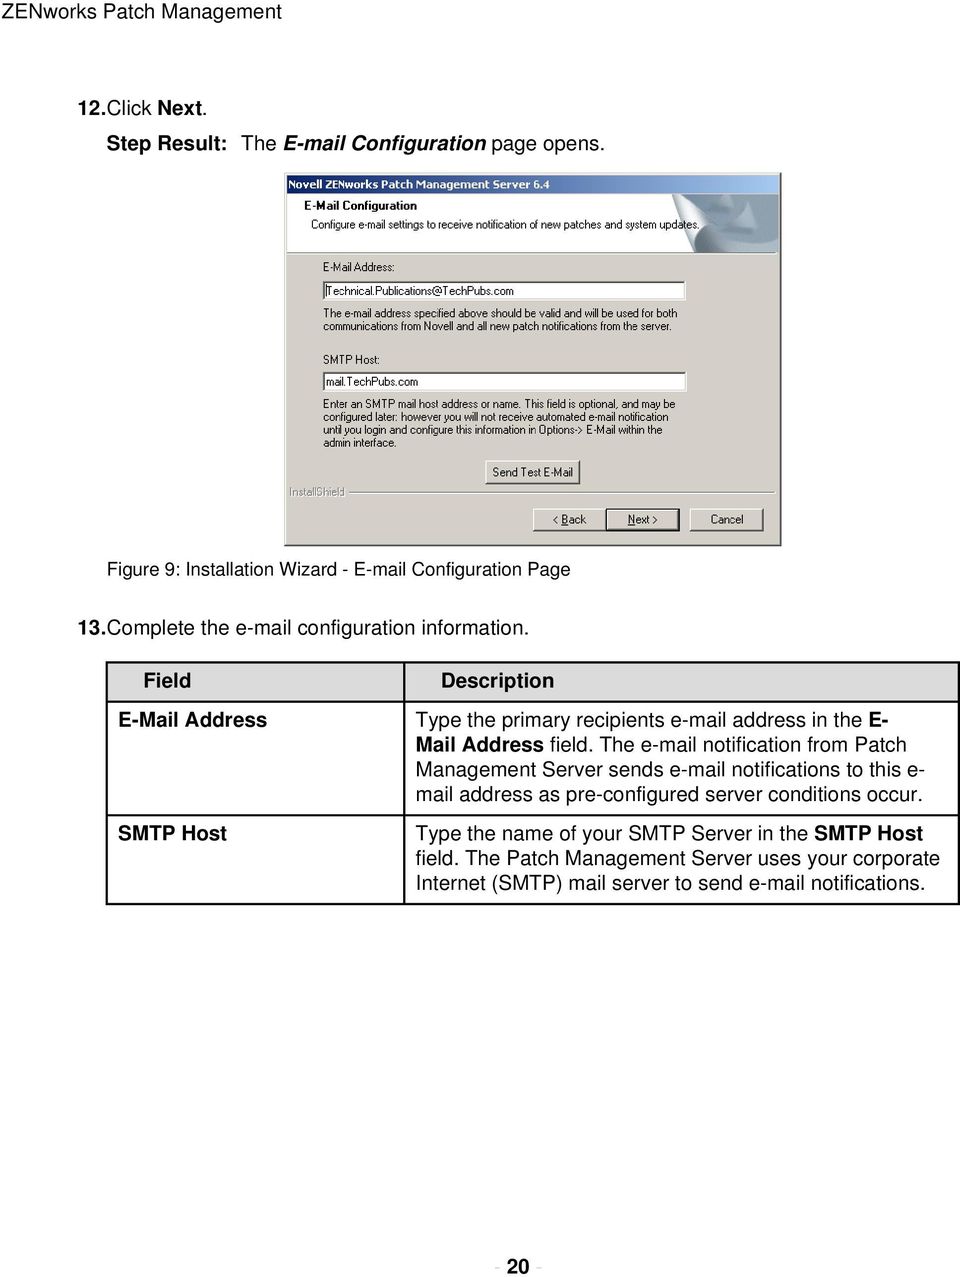 The e-mail notification from Patch Management Server sends e-mail notifications to this e- mail address as pre-configured server conditions occur.